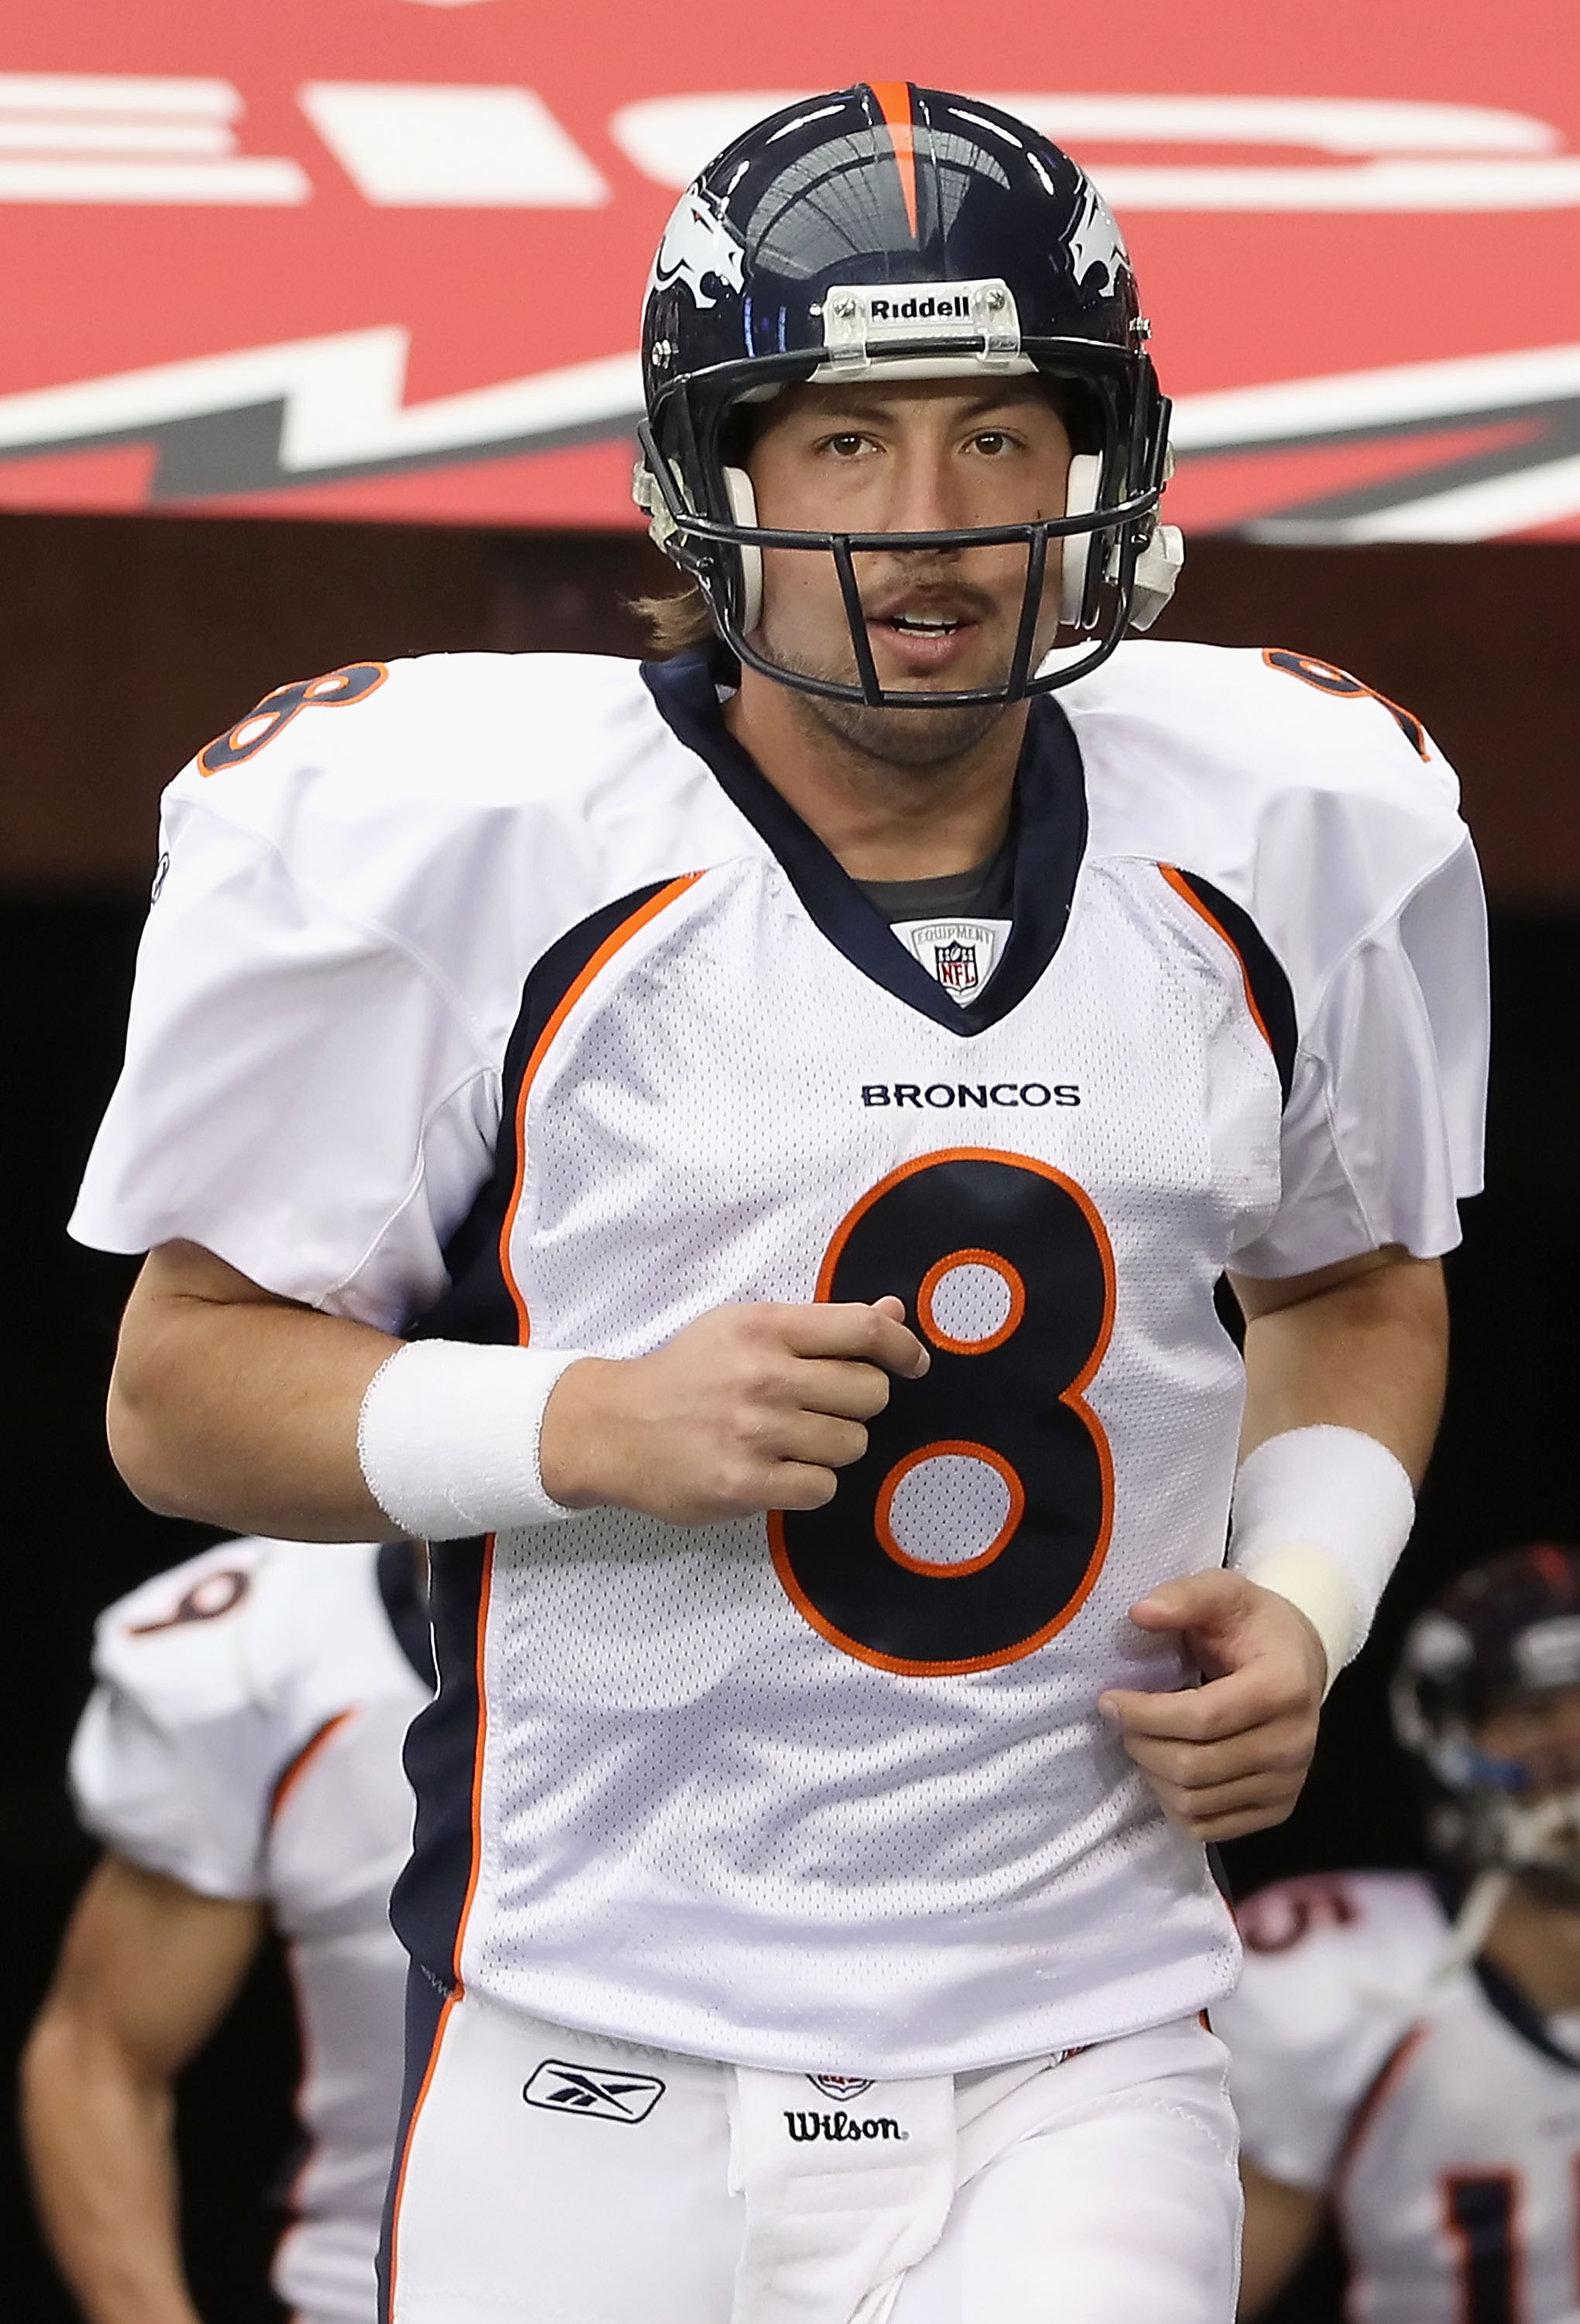 Kleiman] On this day, 9 years ago, #Broncos QB Tim Tebow pulled